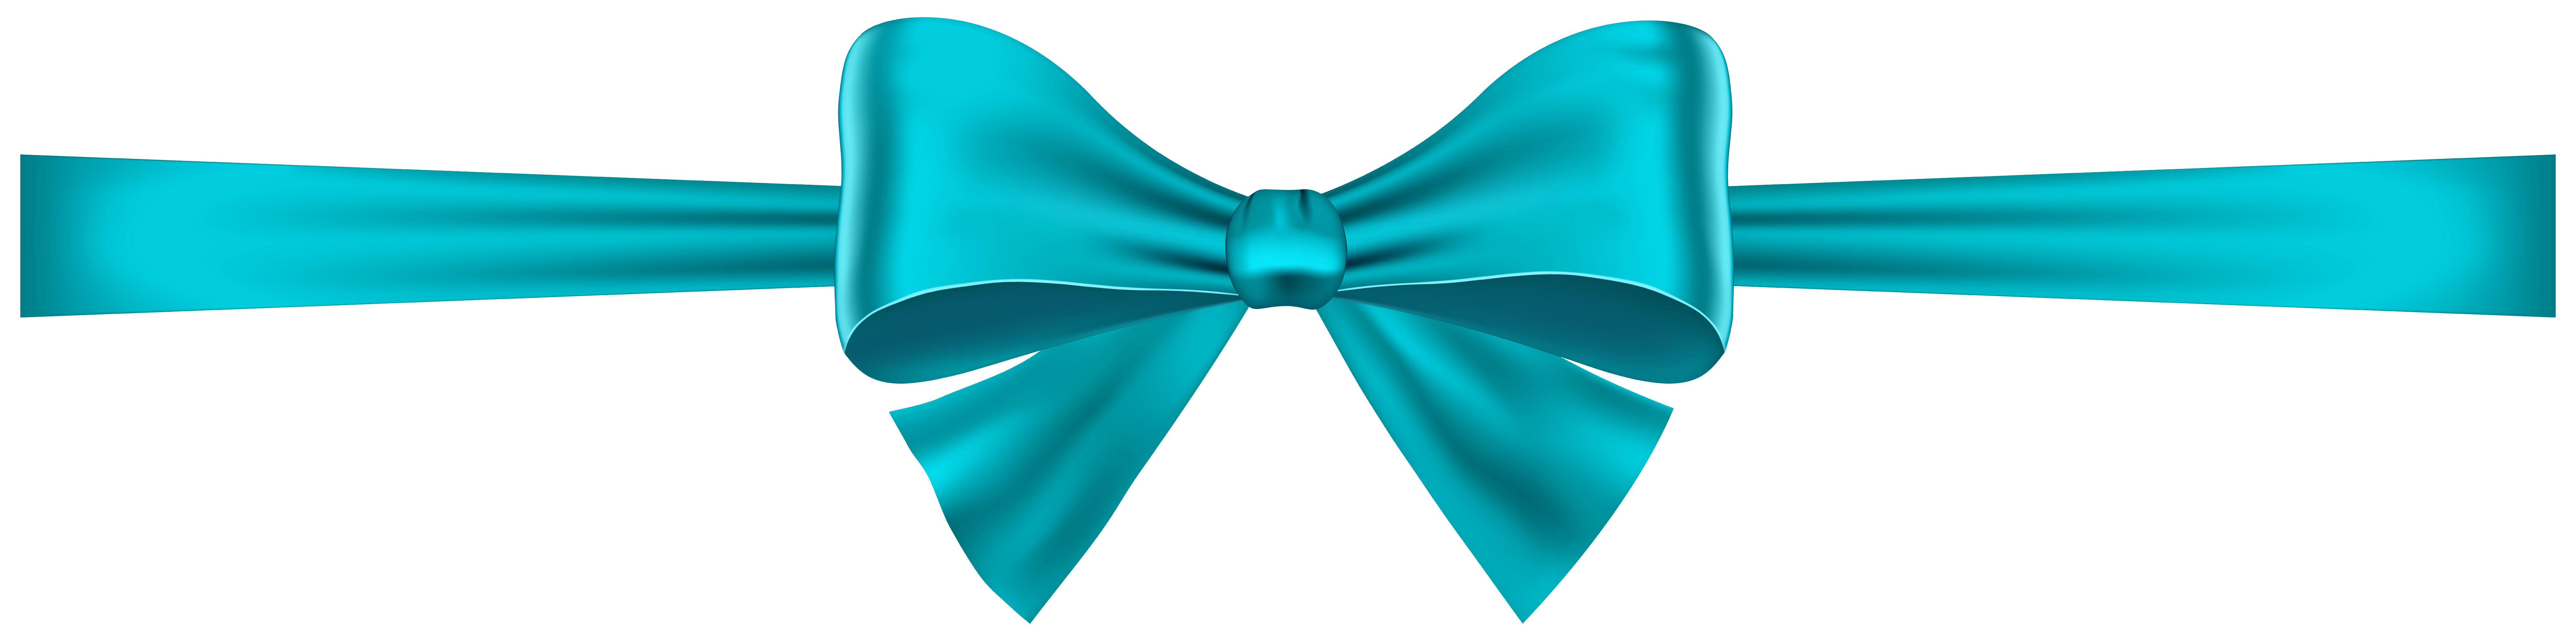 Blue Bow with Ribbon Clipart Image | Gallery Yopriceville - High ...